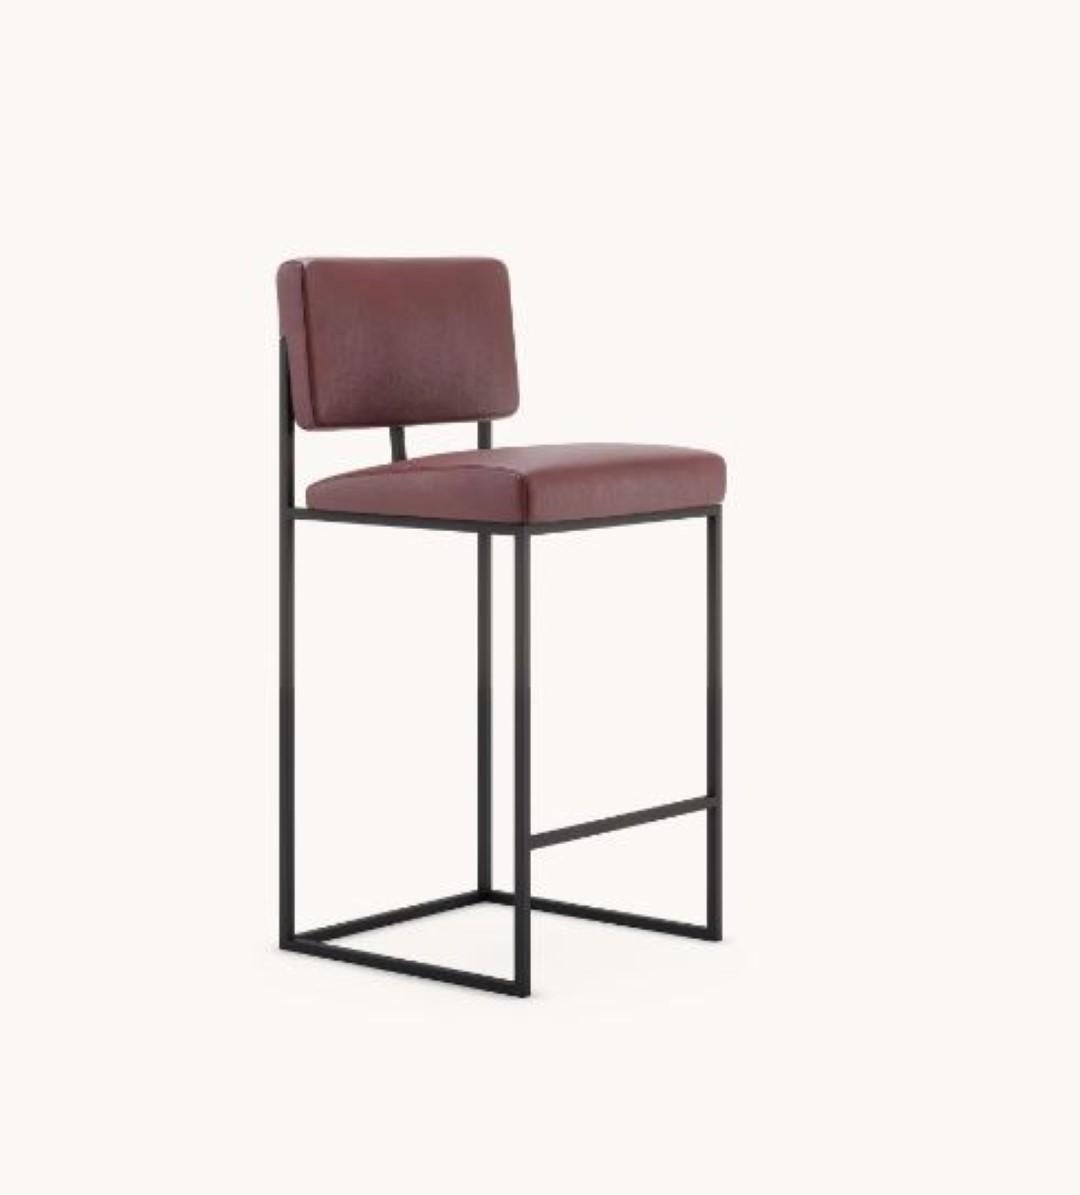 Gram counter chair by Domkapa
Materials: Natural Leather, Black Texturized Steel. 
Dimensions: W 44 x D 45 x H 109 cm. 
Also available in different materials. 

Gram’s geometrical and unexpected shapes are the perfect eye-catching option for